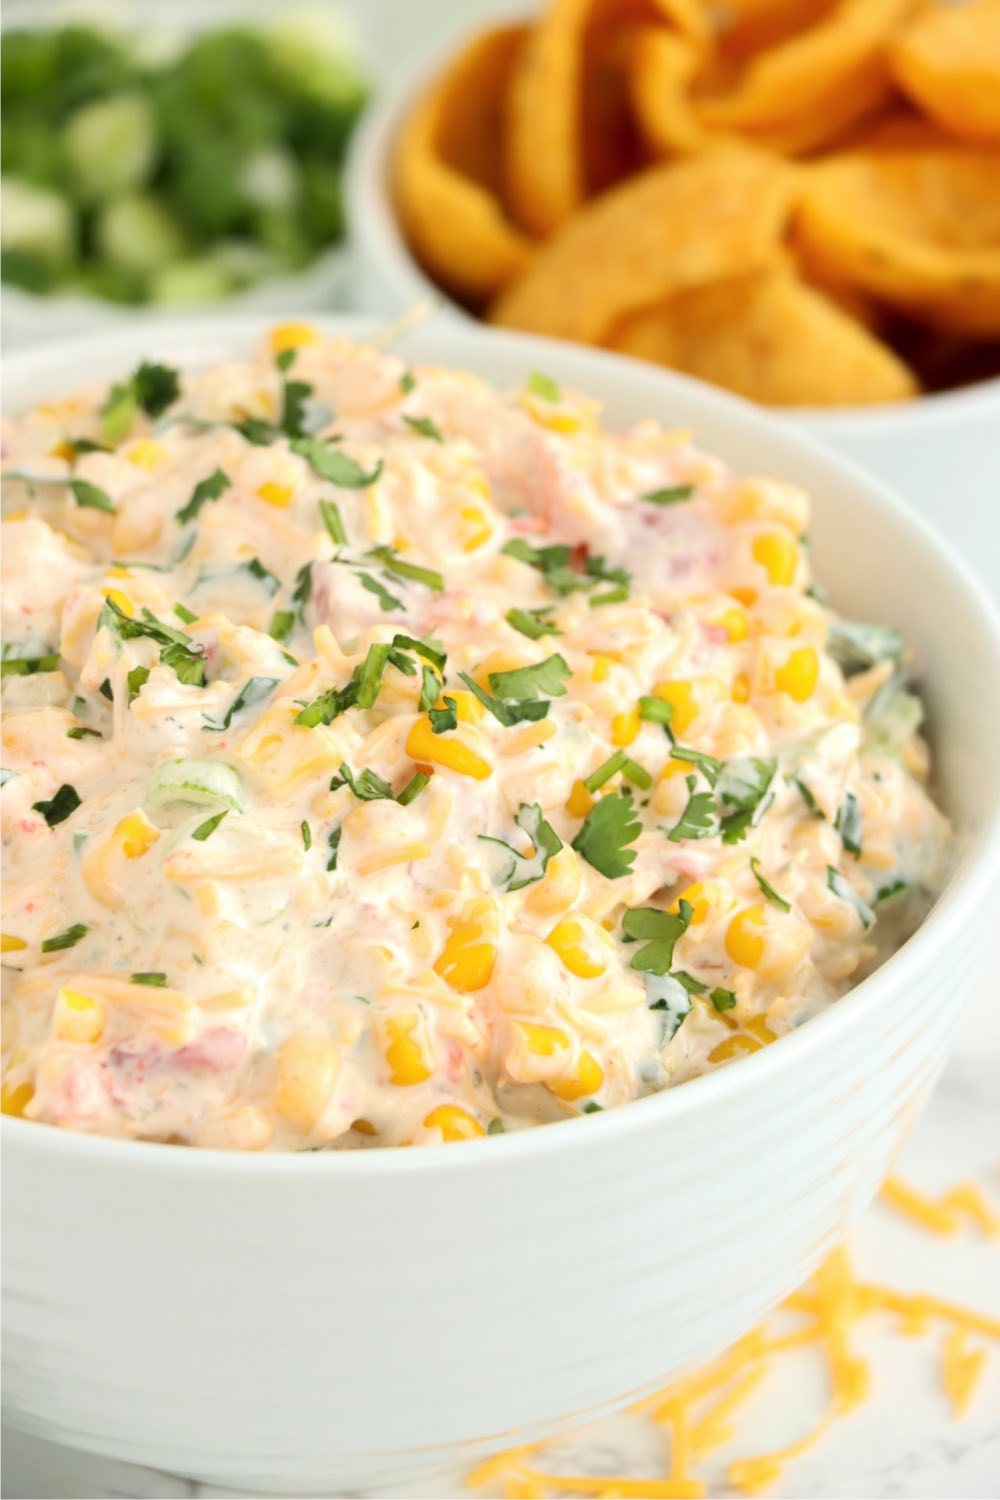 Bowl of corn dip made with Mexicorn and fresh ingredients